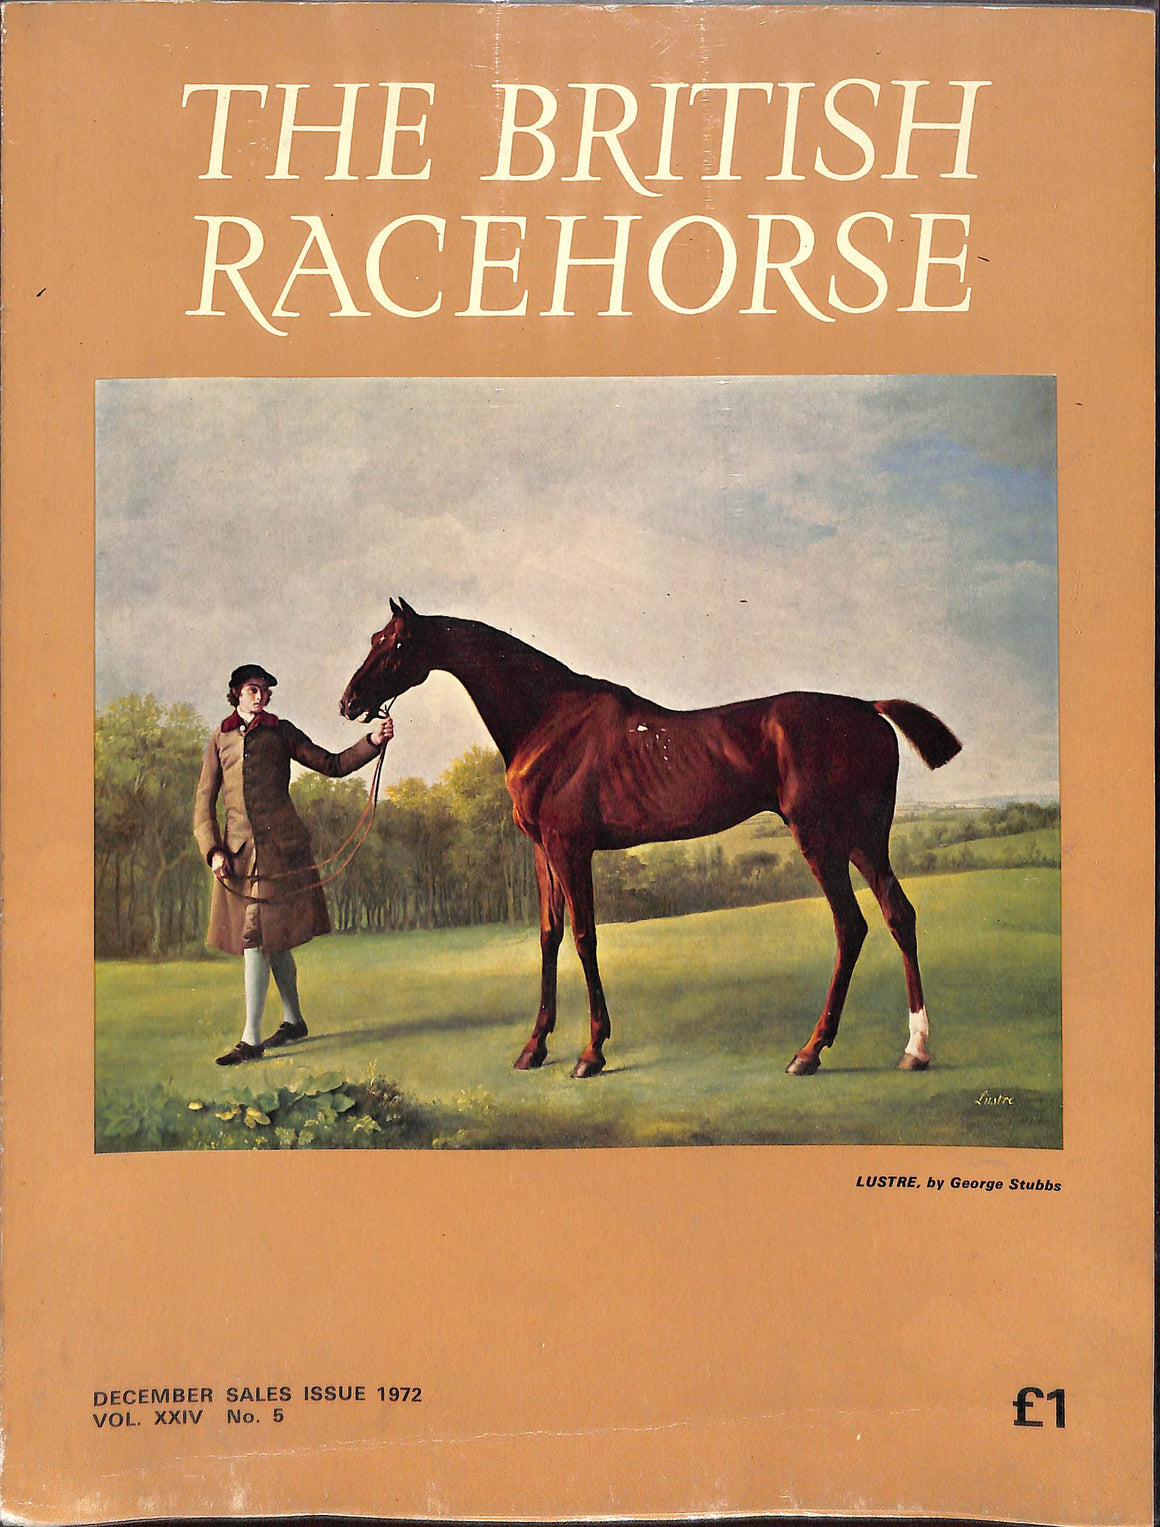 The British Racehorse: December Sales Issue 1972